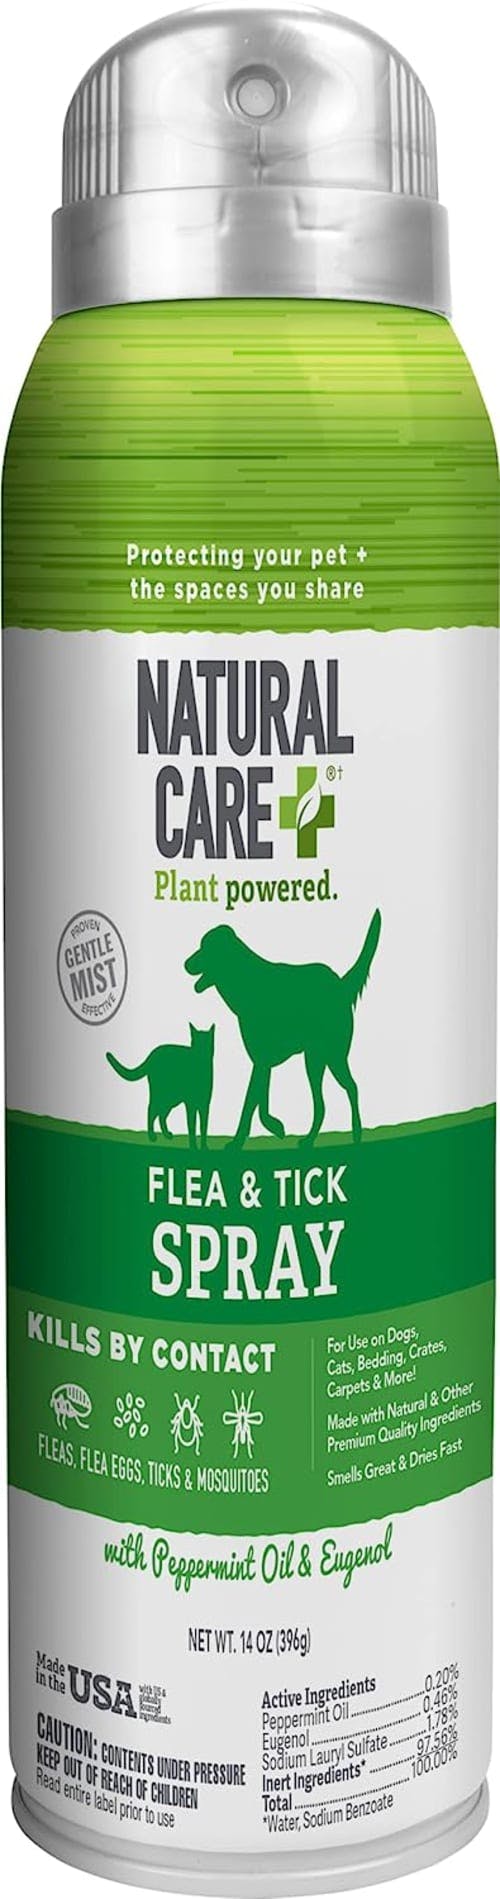 OUT Natural Care Pet Flea and Tick Spray review